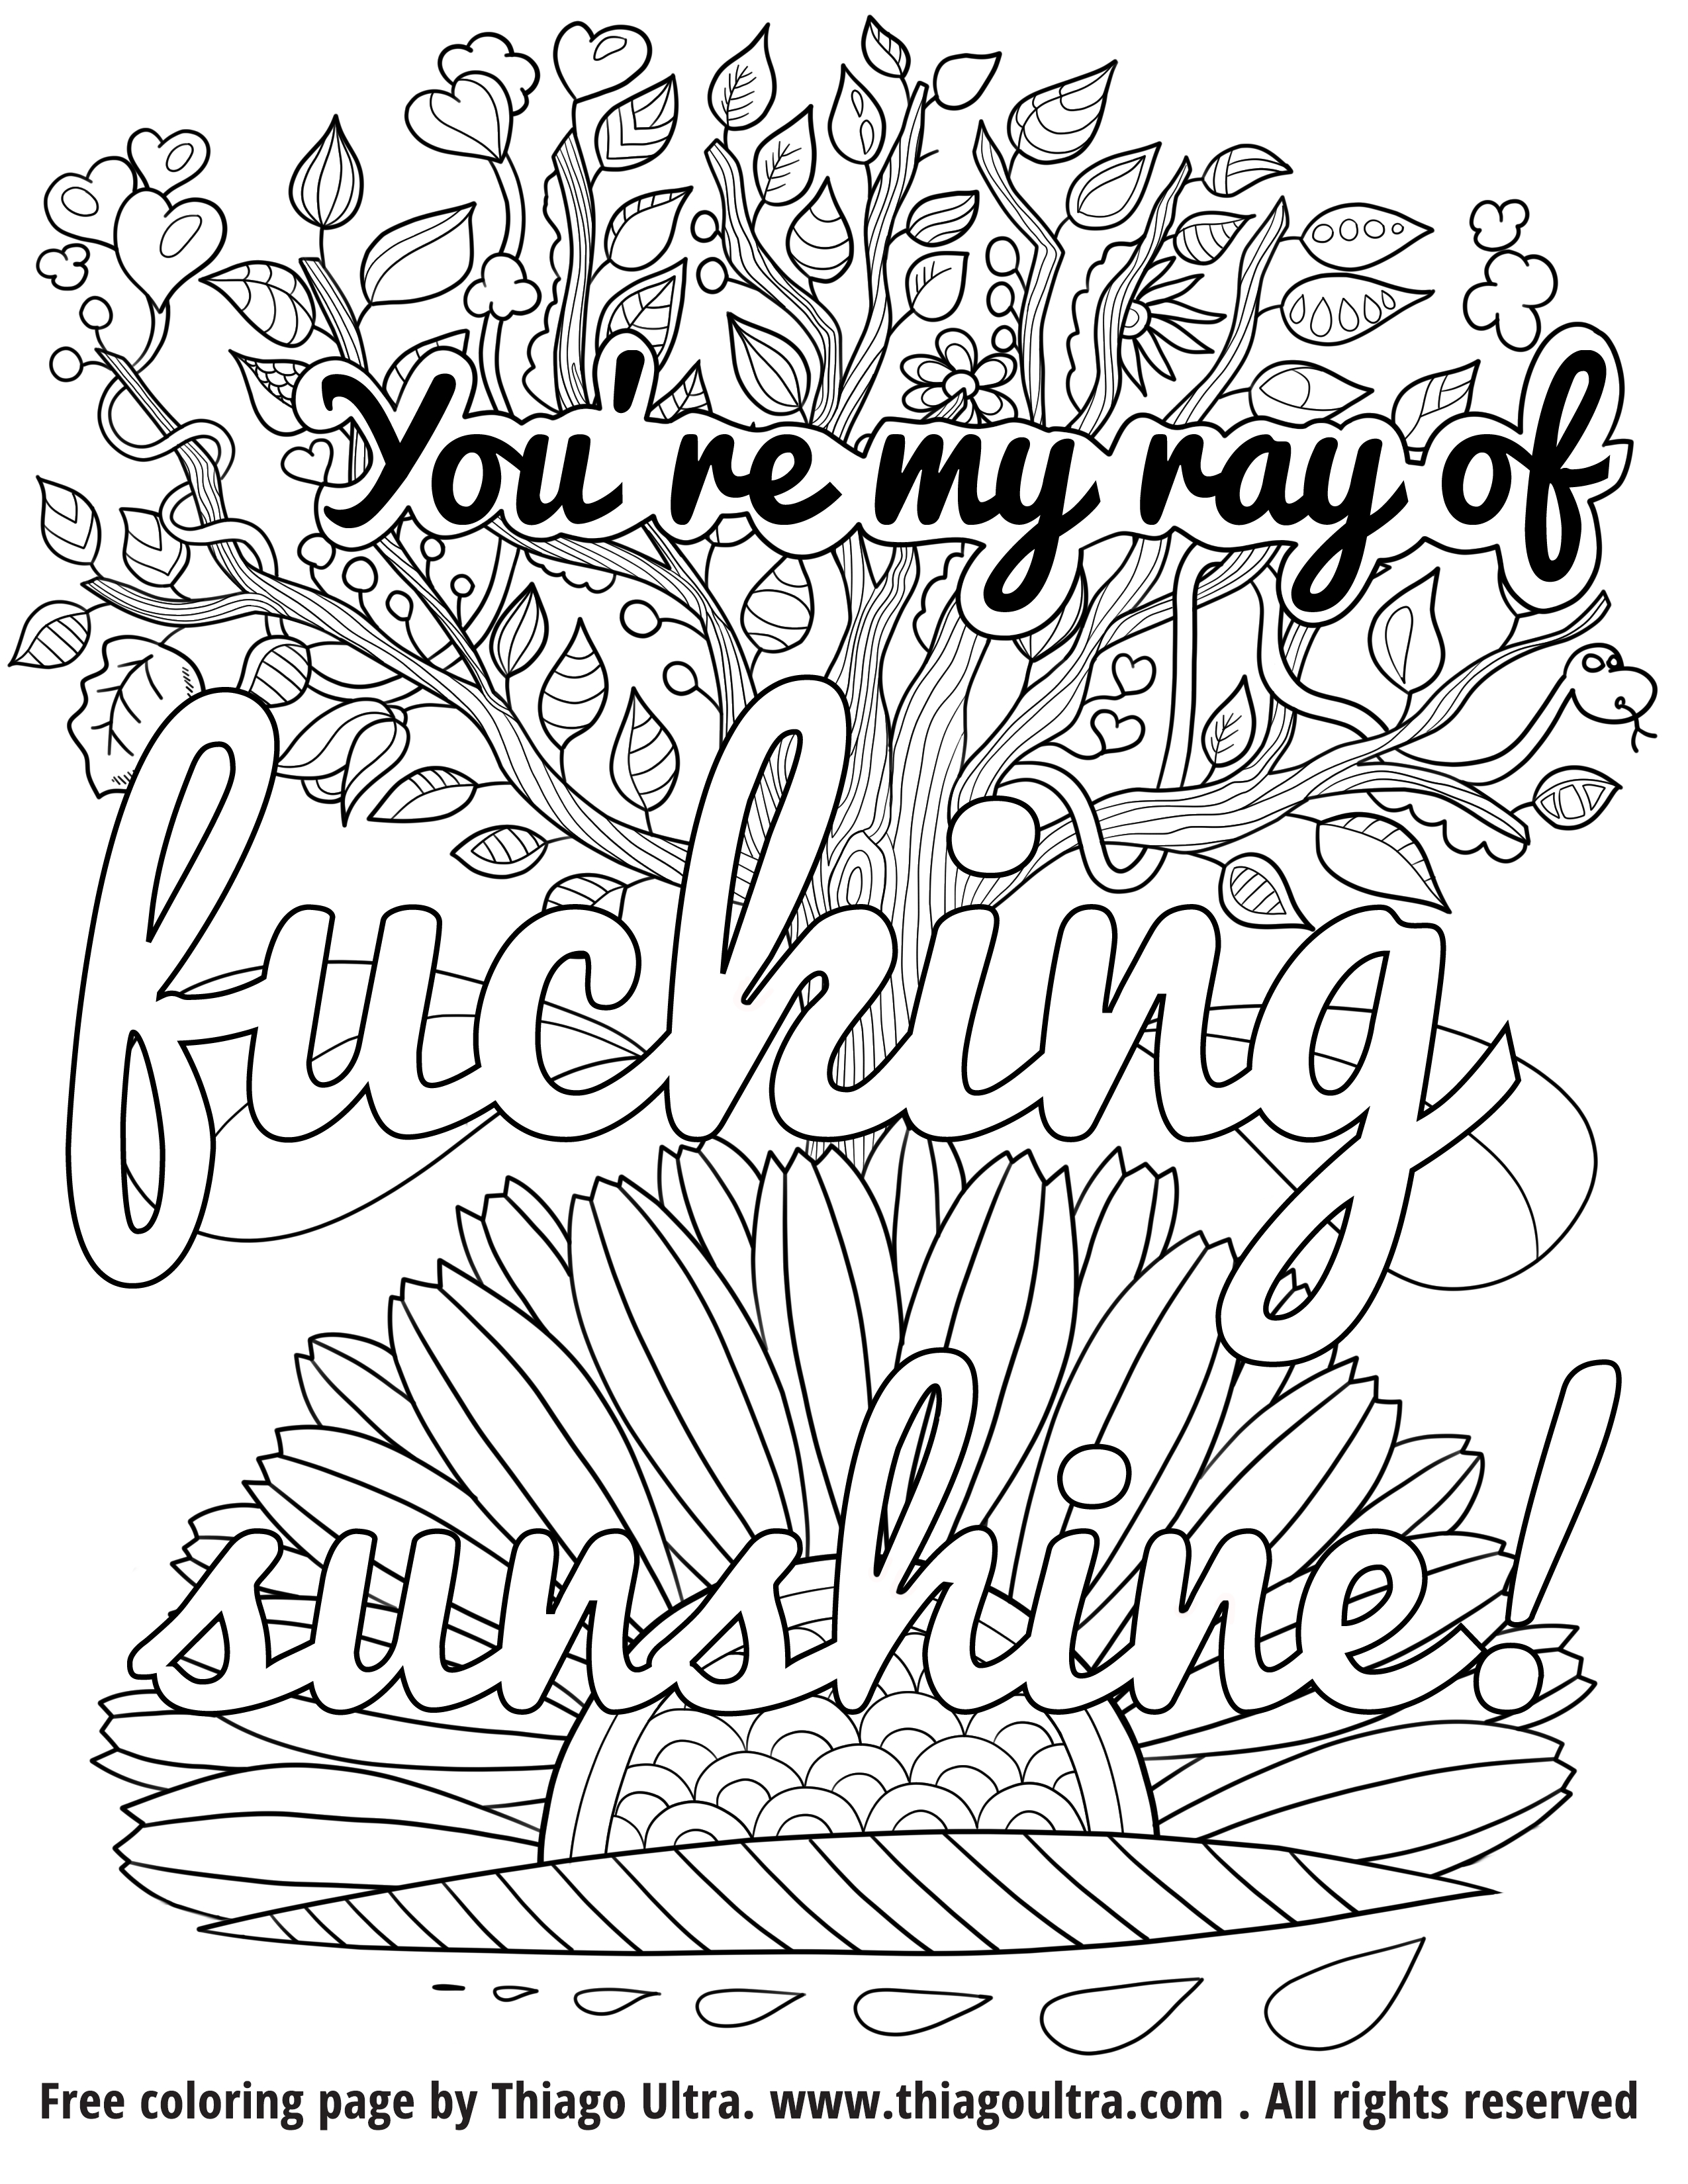 Swear Word Coloring Pages at Free printable